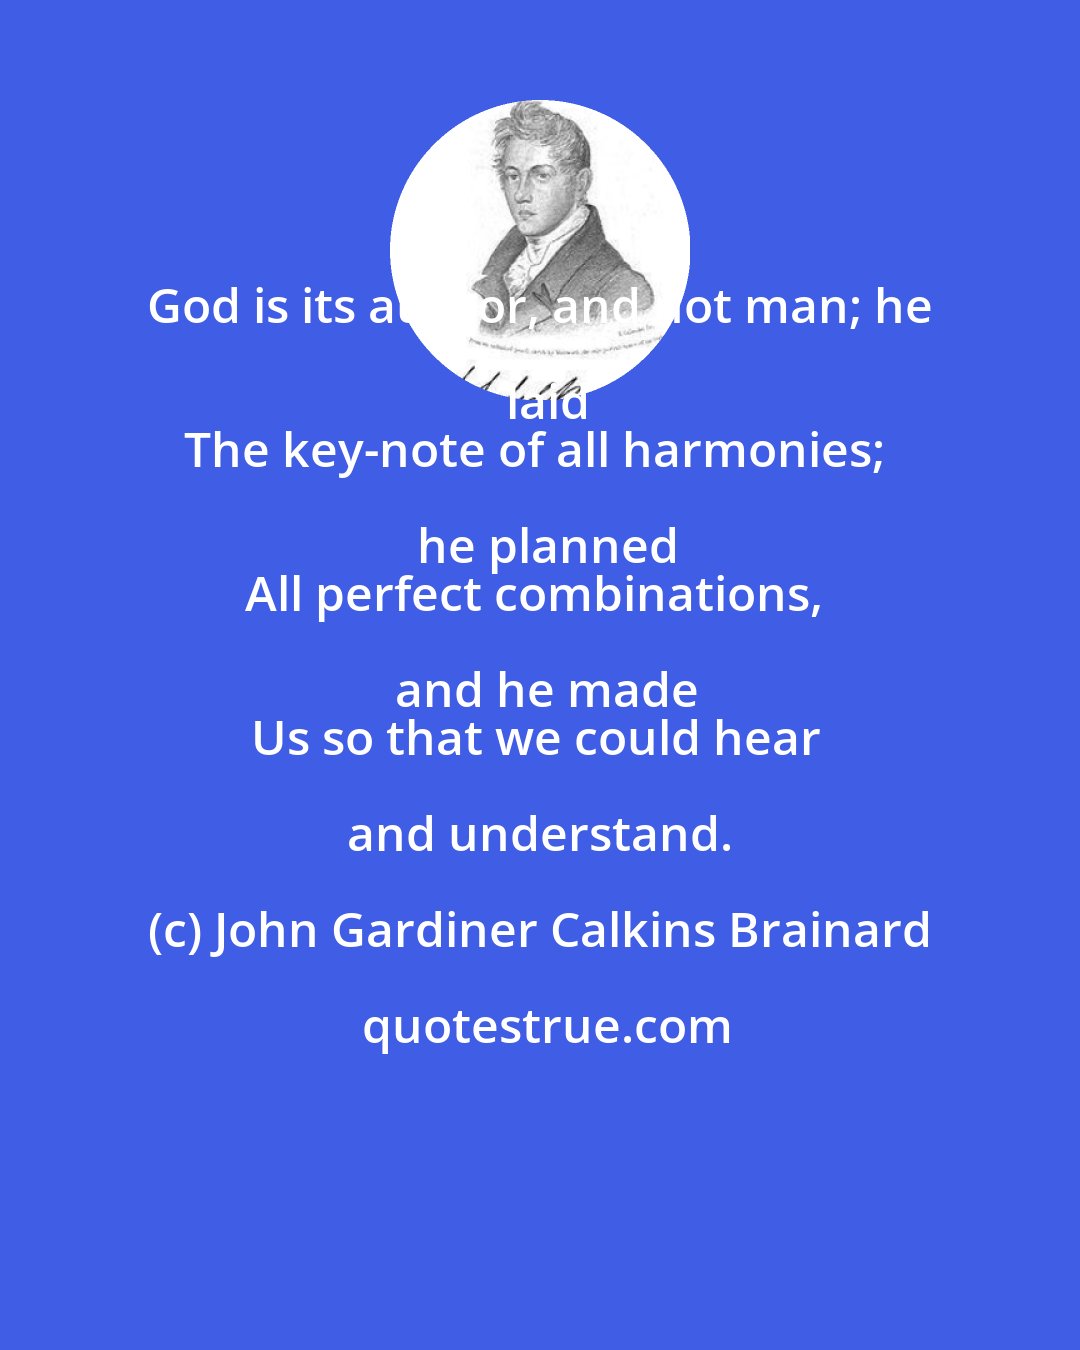 John Gardiner Calkins Brainard: God is its author, and not man; he laid
The key-note of all harmonies; he planned
All perfect combinations, and he made
Us so that we could hear and understand.